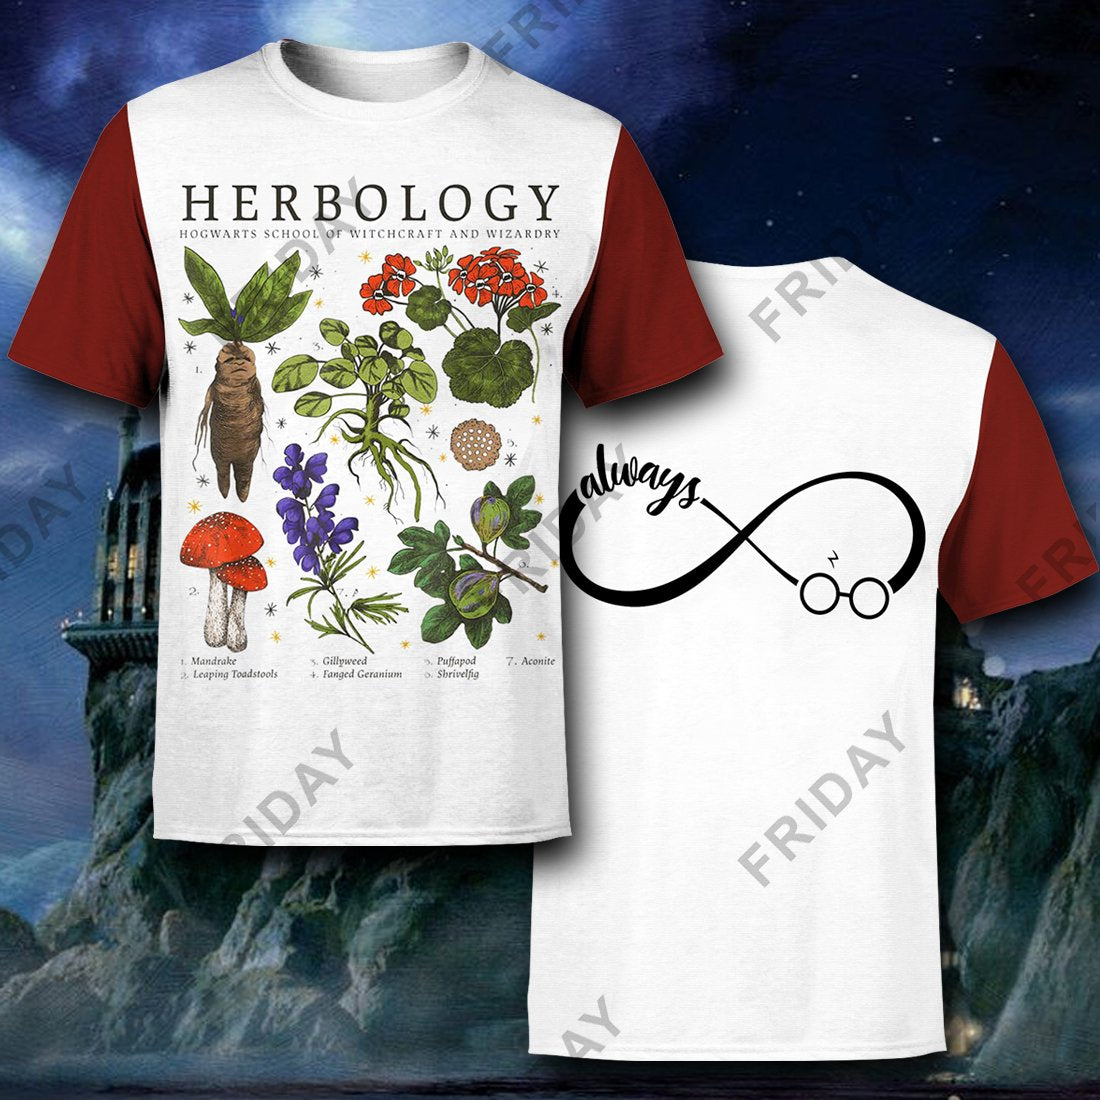 Unifinz HP T-shirt Herbology Always Infinity Red White T-shirt High Quality HP Hoodie Sweater Tank 2026